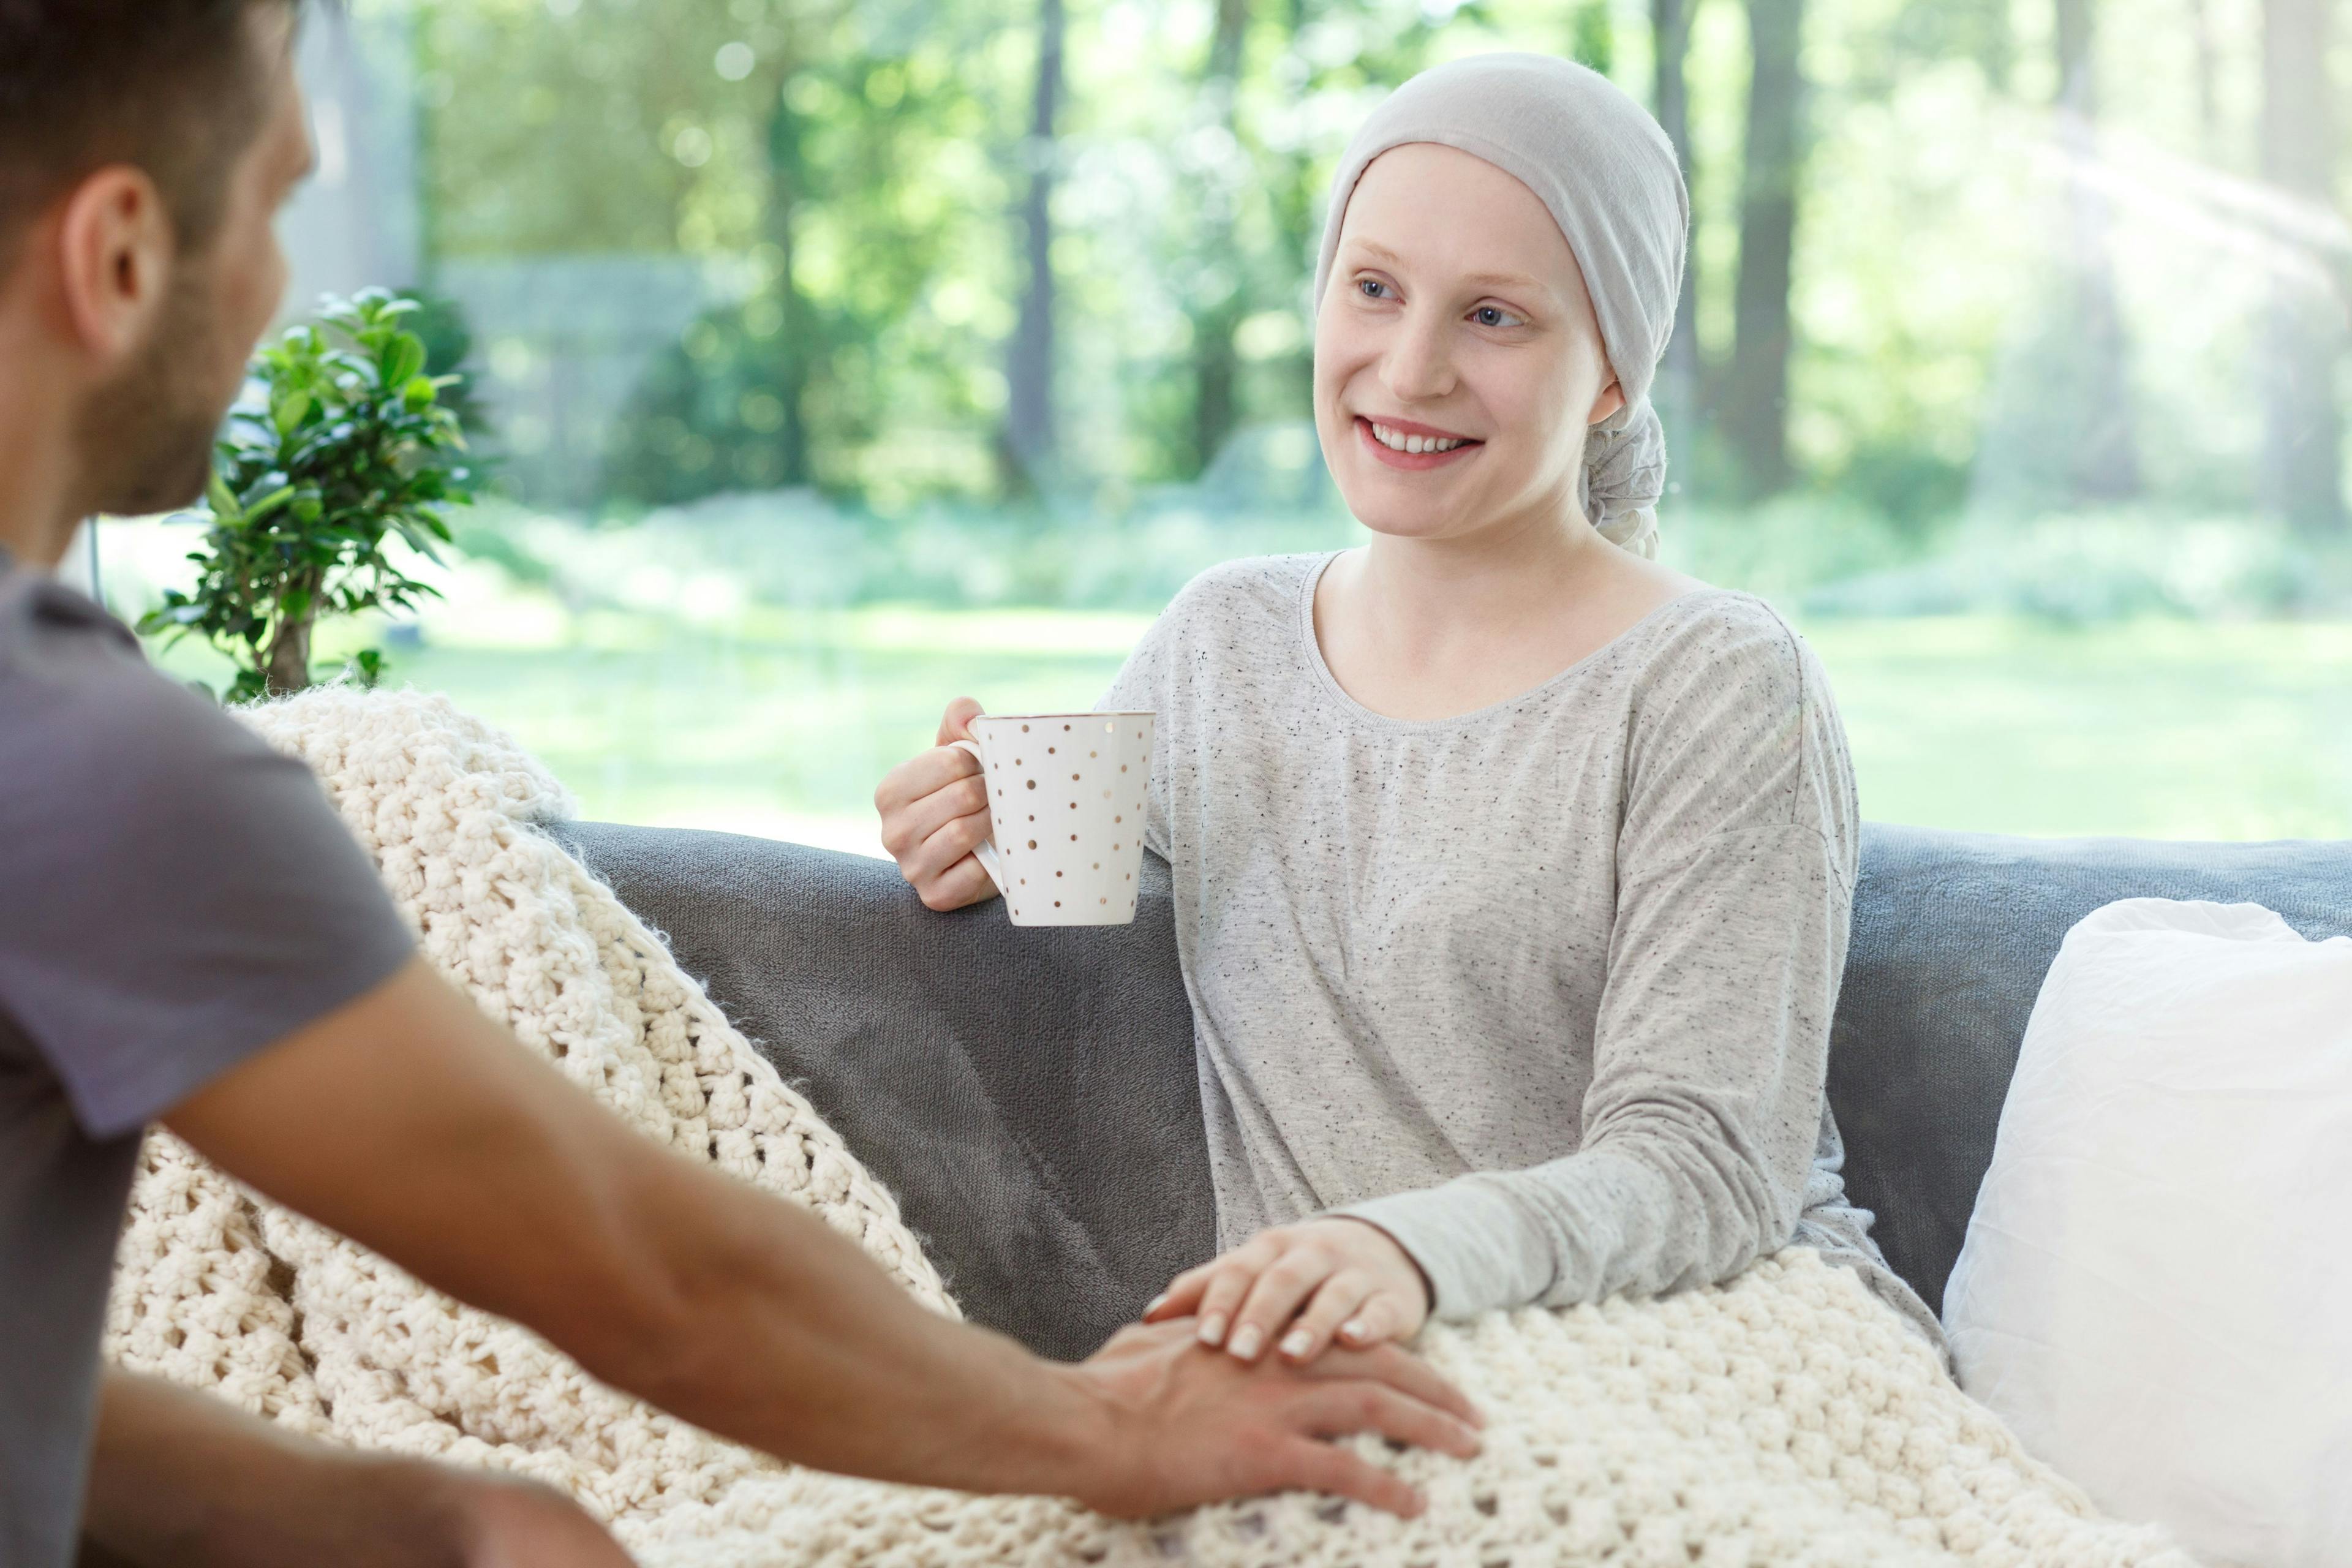 Nighttime Compression Demonstrates ‘Amazing Results’ for Patients With Breast Cancer-Related Lymphedema